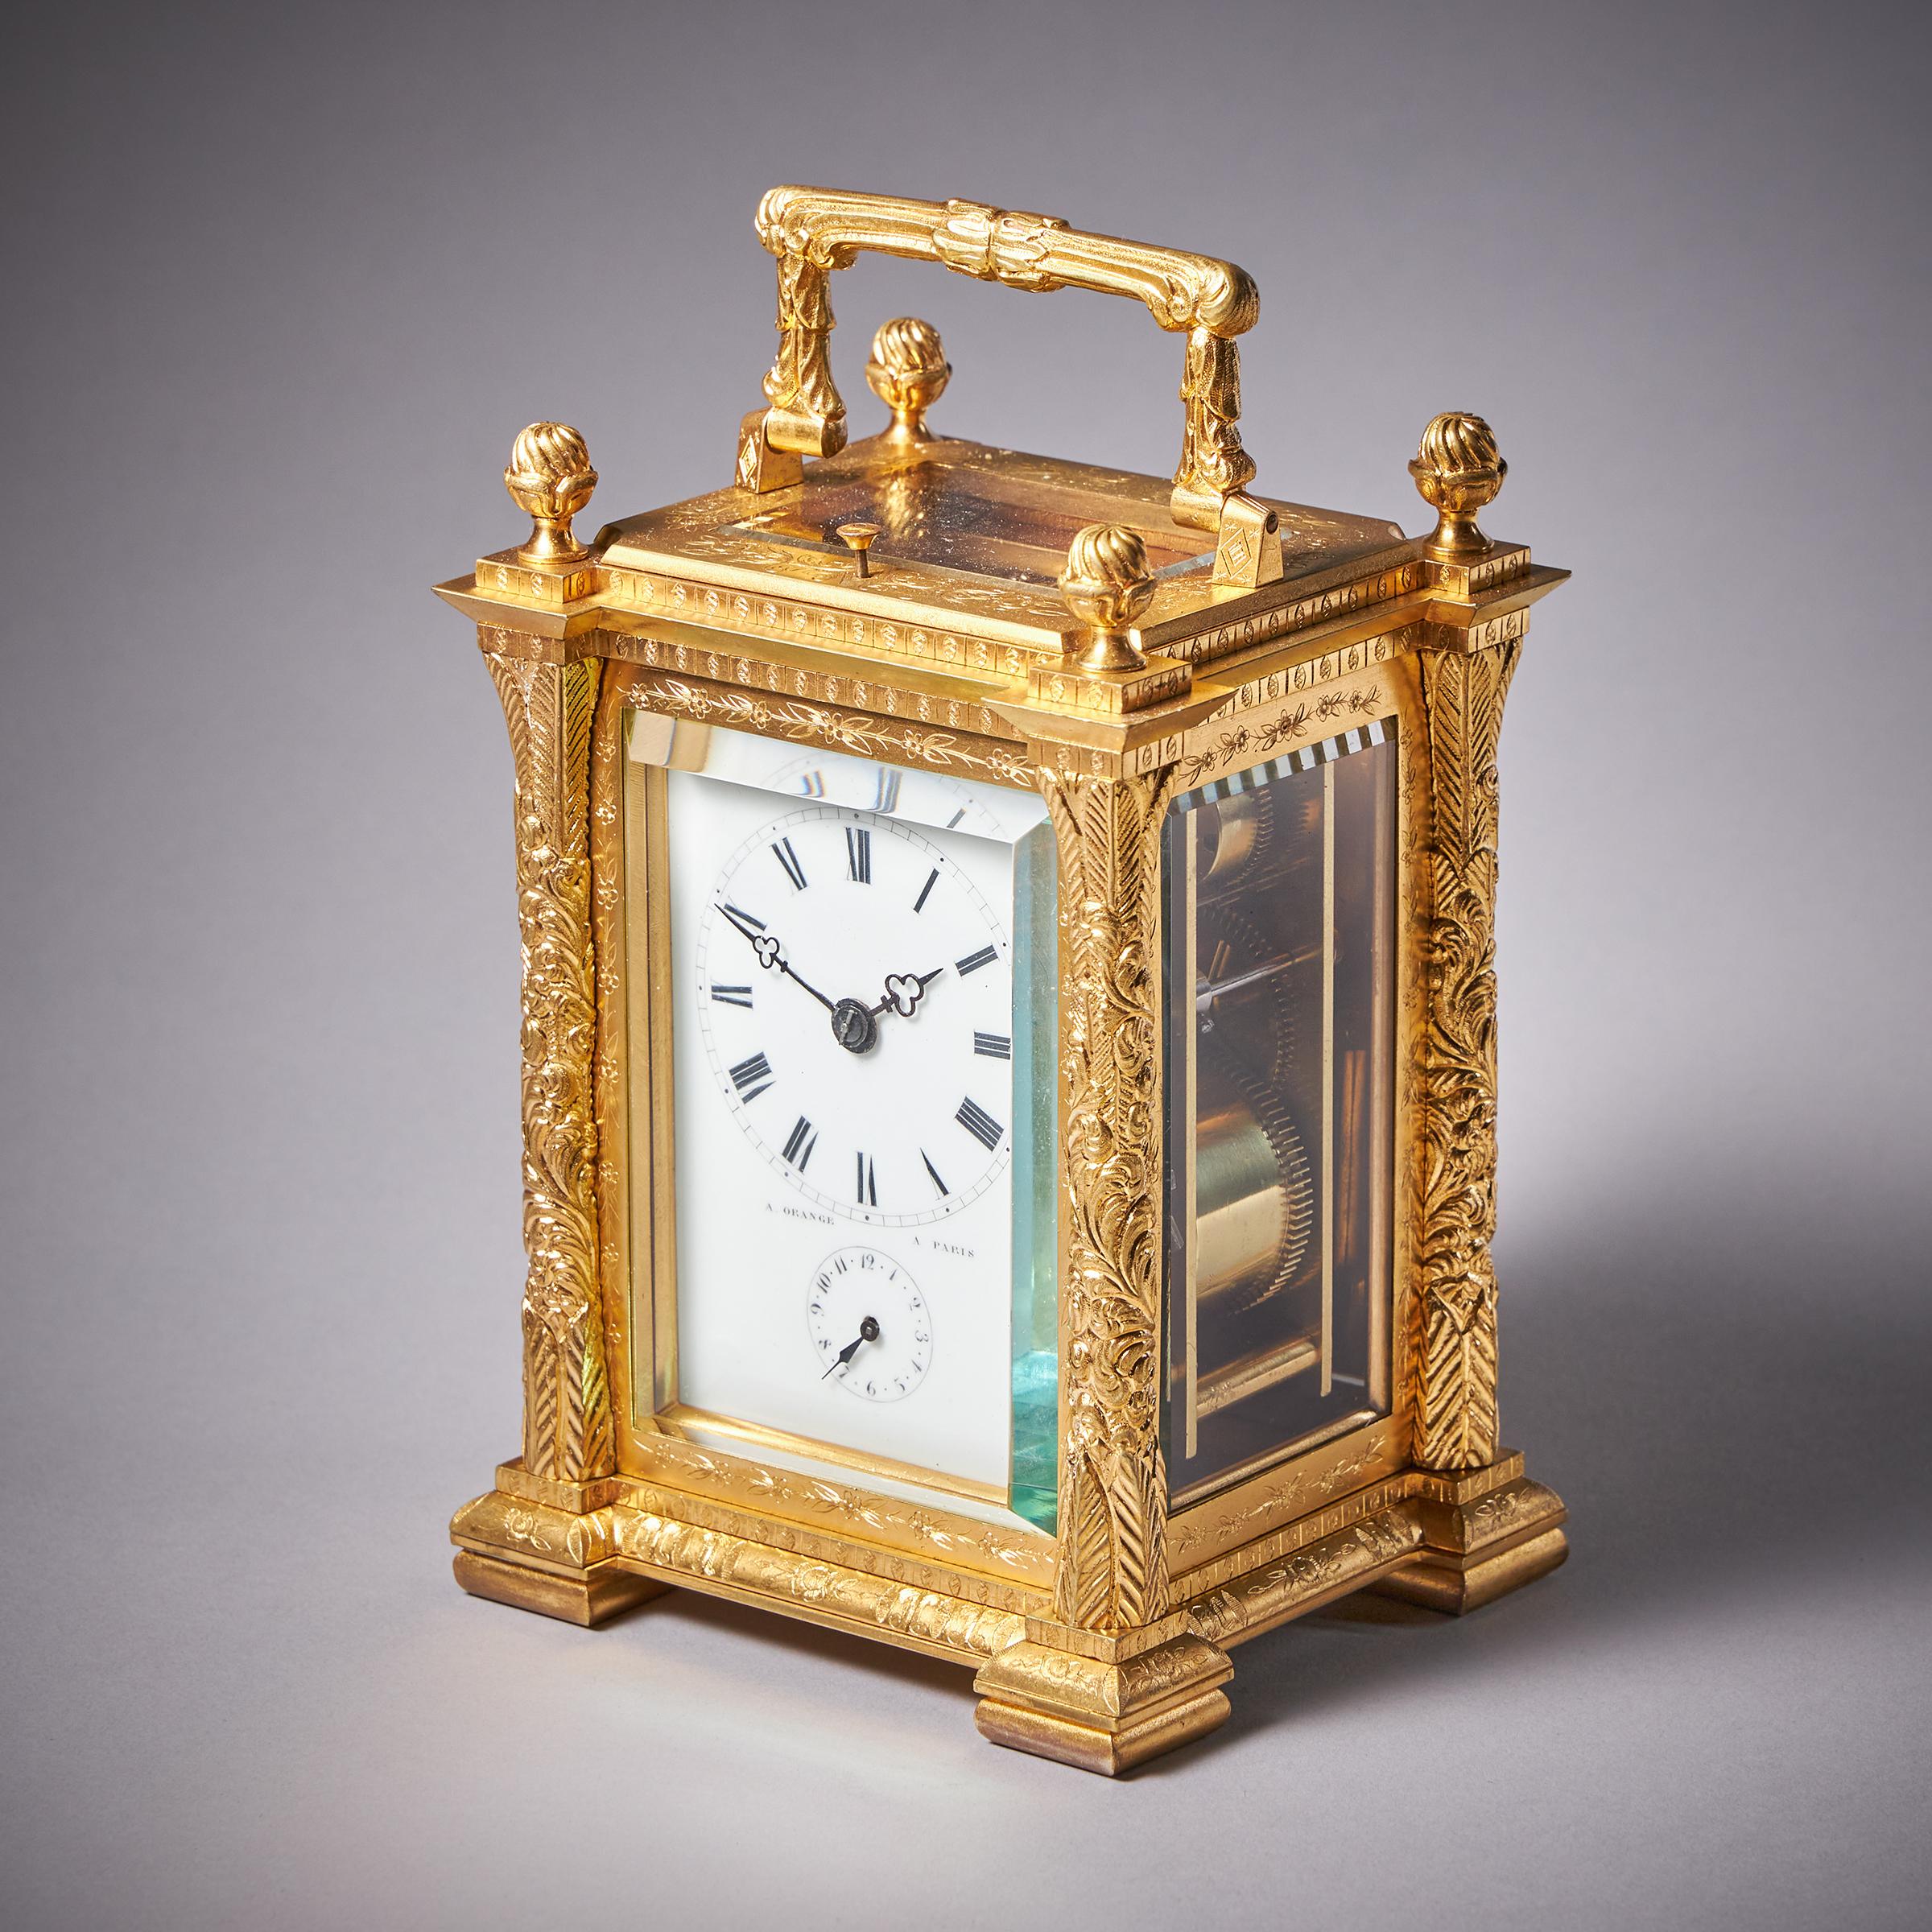 A most unusual engraved gilt-brass French carriage clock by A. Orange, c. 1860.
 
Case
The attractive beautifully engraved gilt-brass clock of unusual shape has four shaped pillars on the corners and is surmounted by four torch finials and a